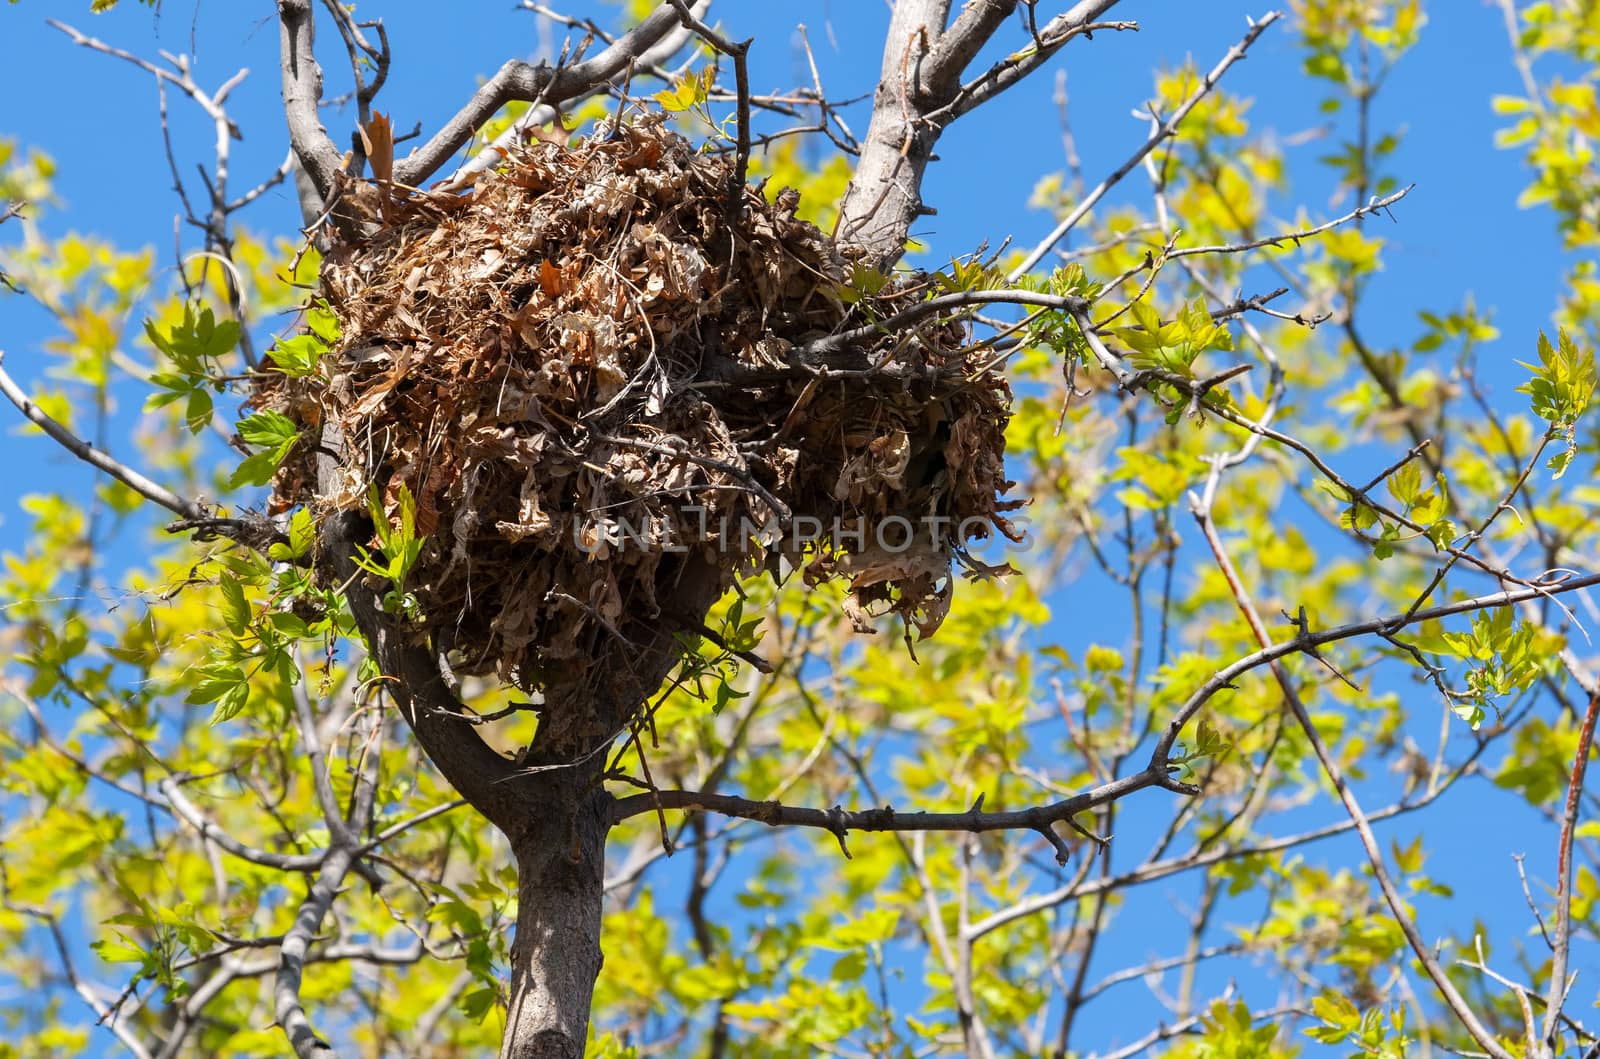 Tree squirrel nest high up in a leafy tree.